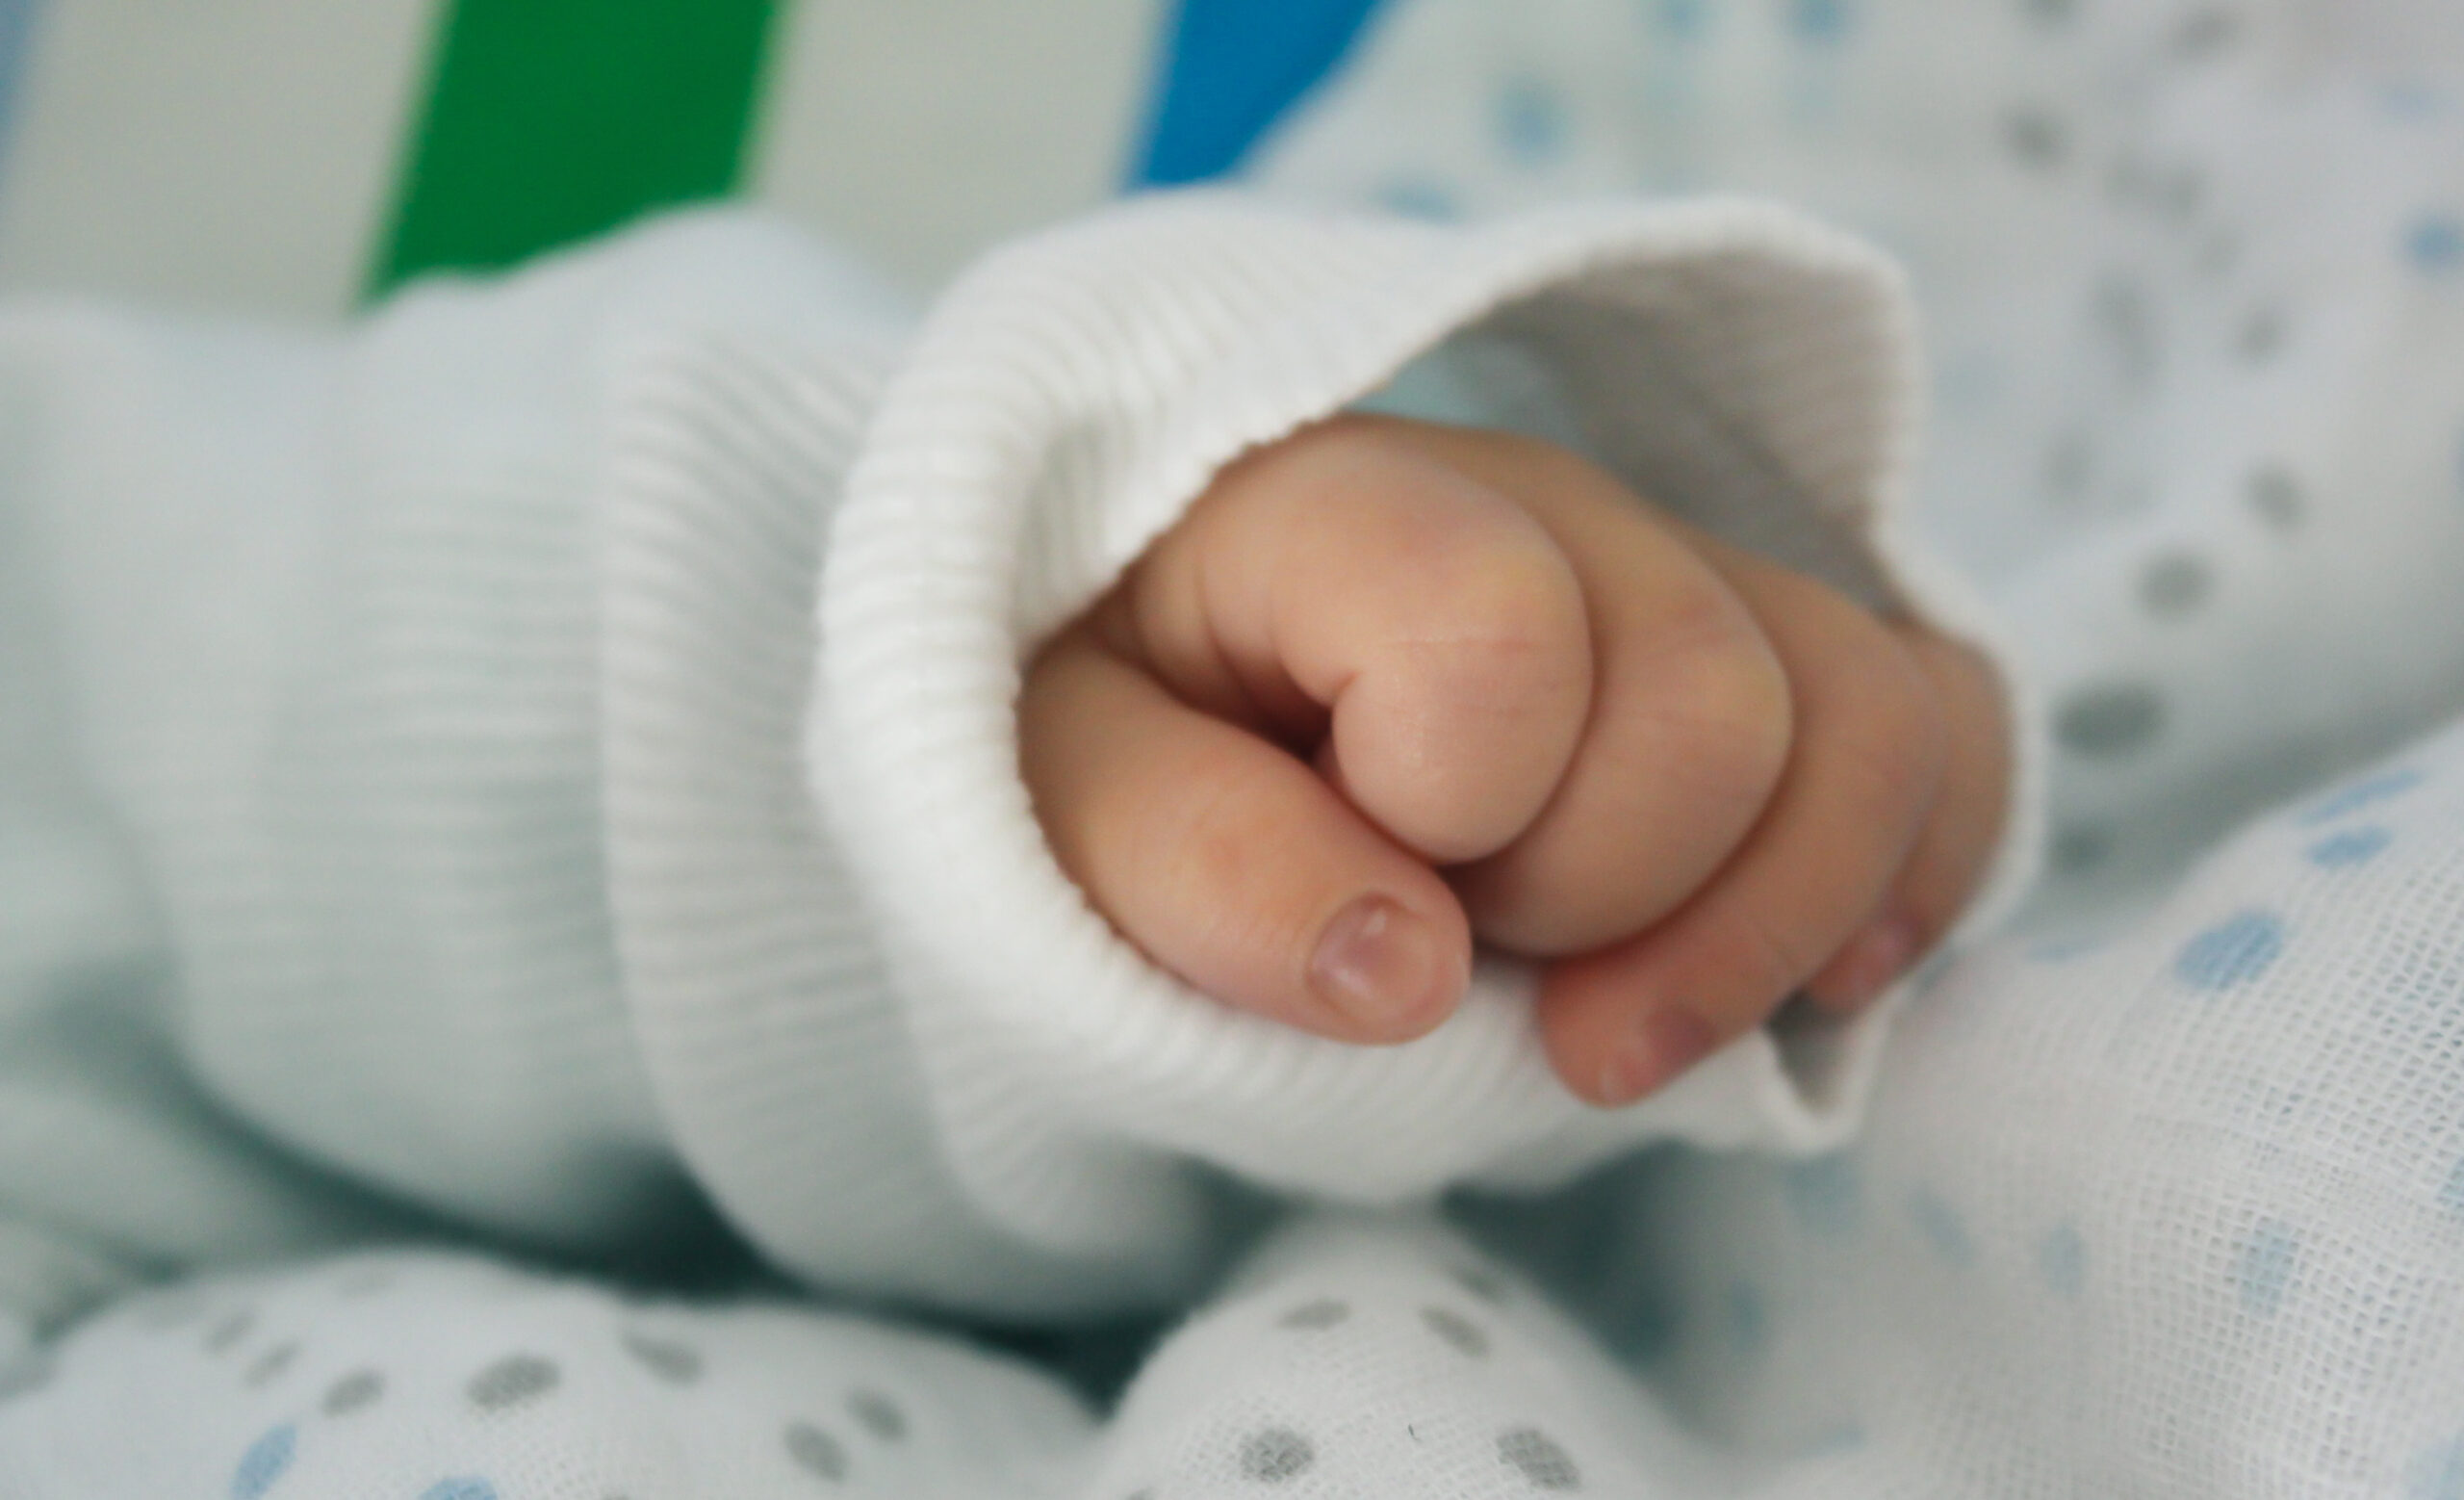 hand person growth white finger child baby close up product fingers infant newborn skin organ human action 1068719 scaled